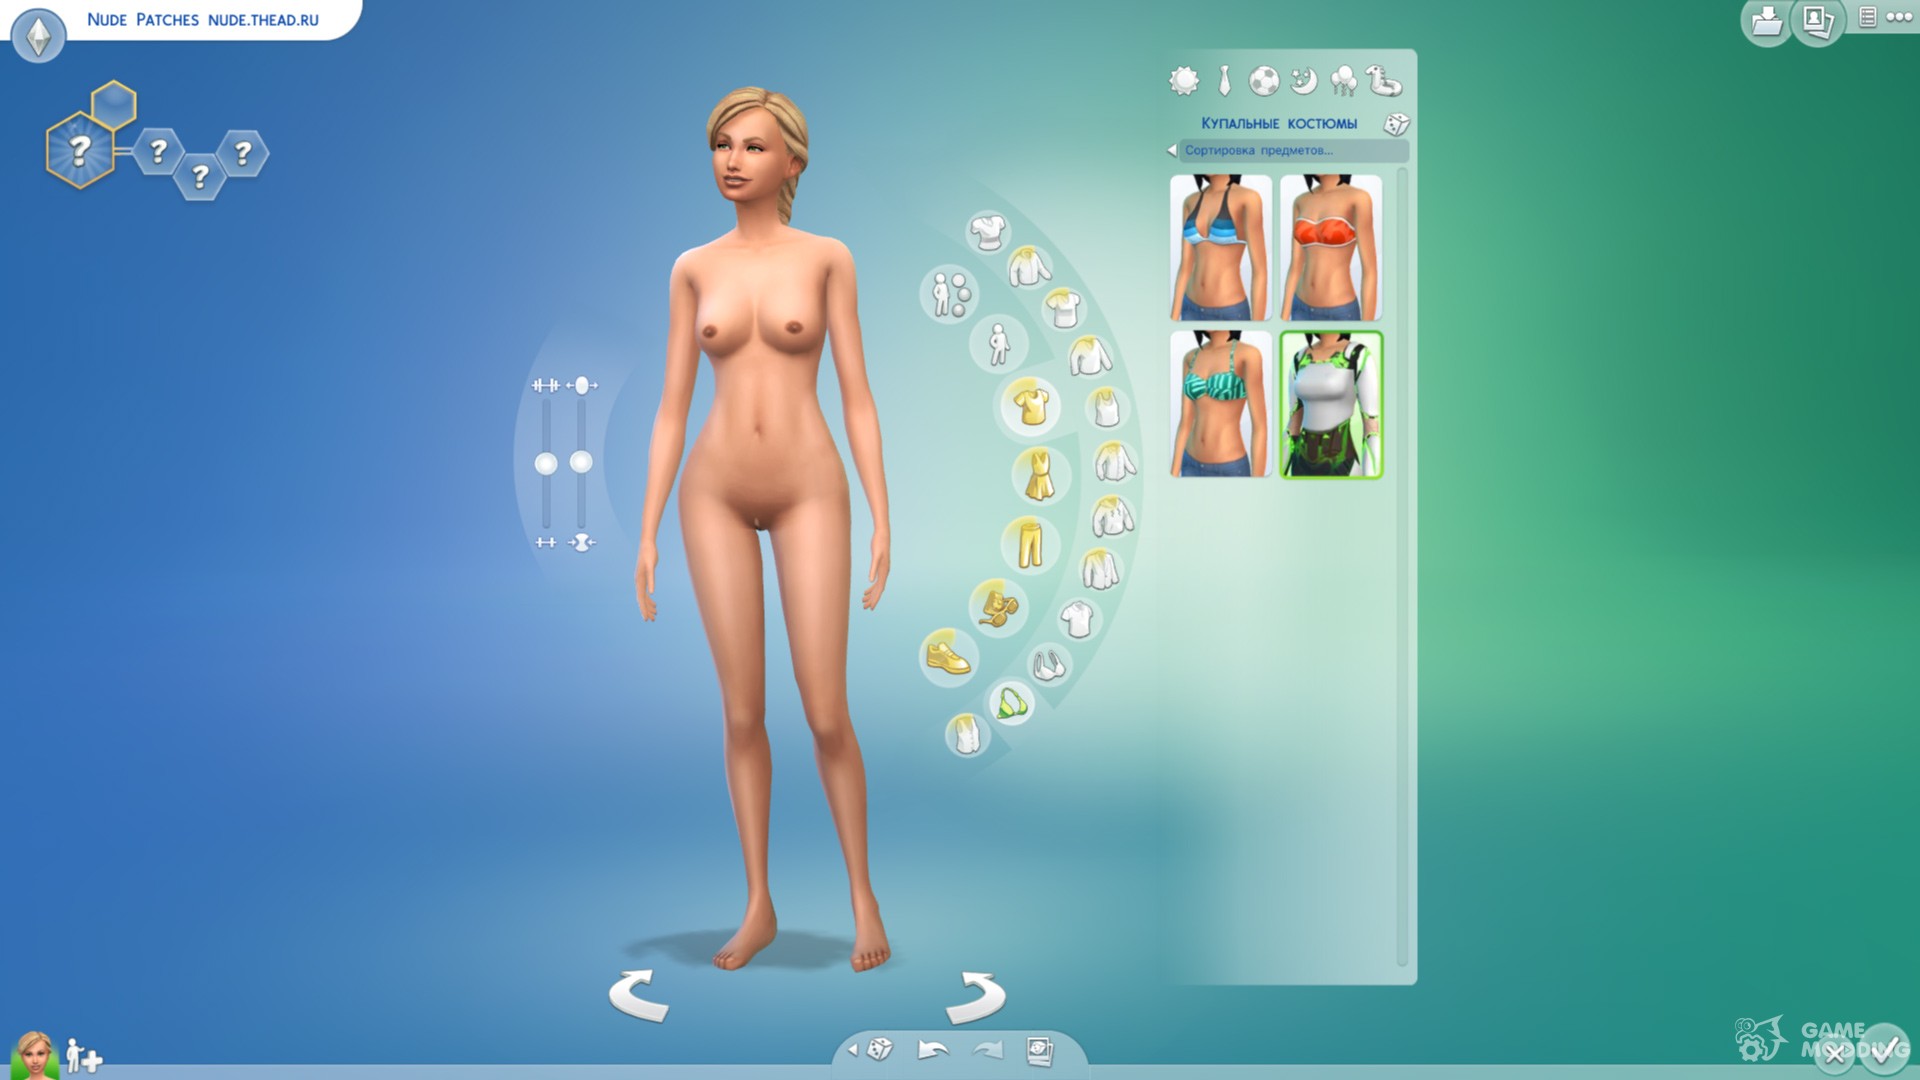 dakota bollinger recommends the sims naked mod pic